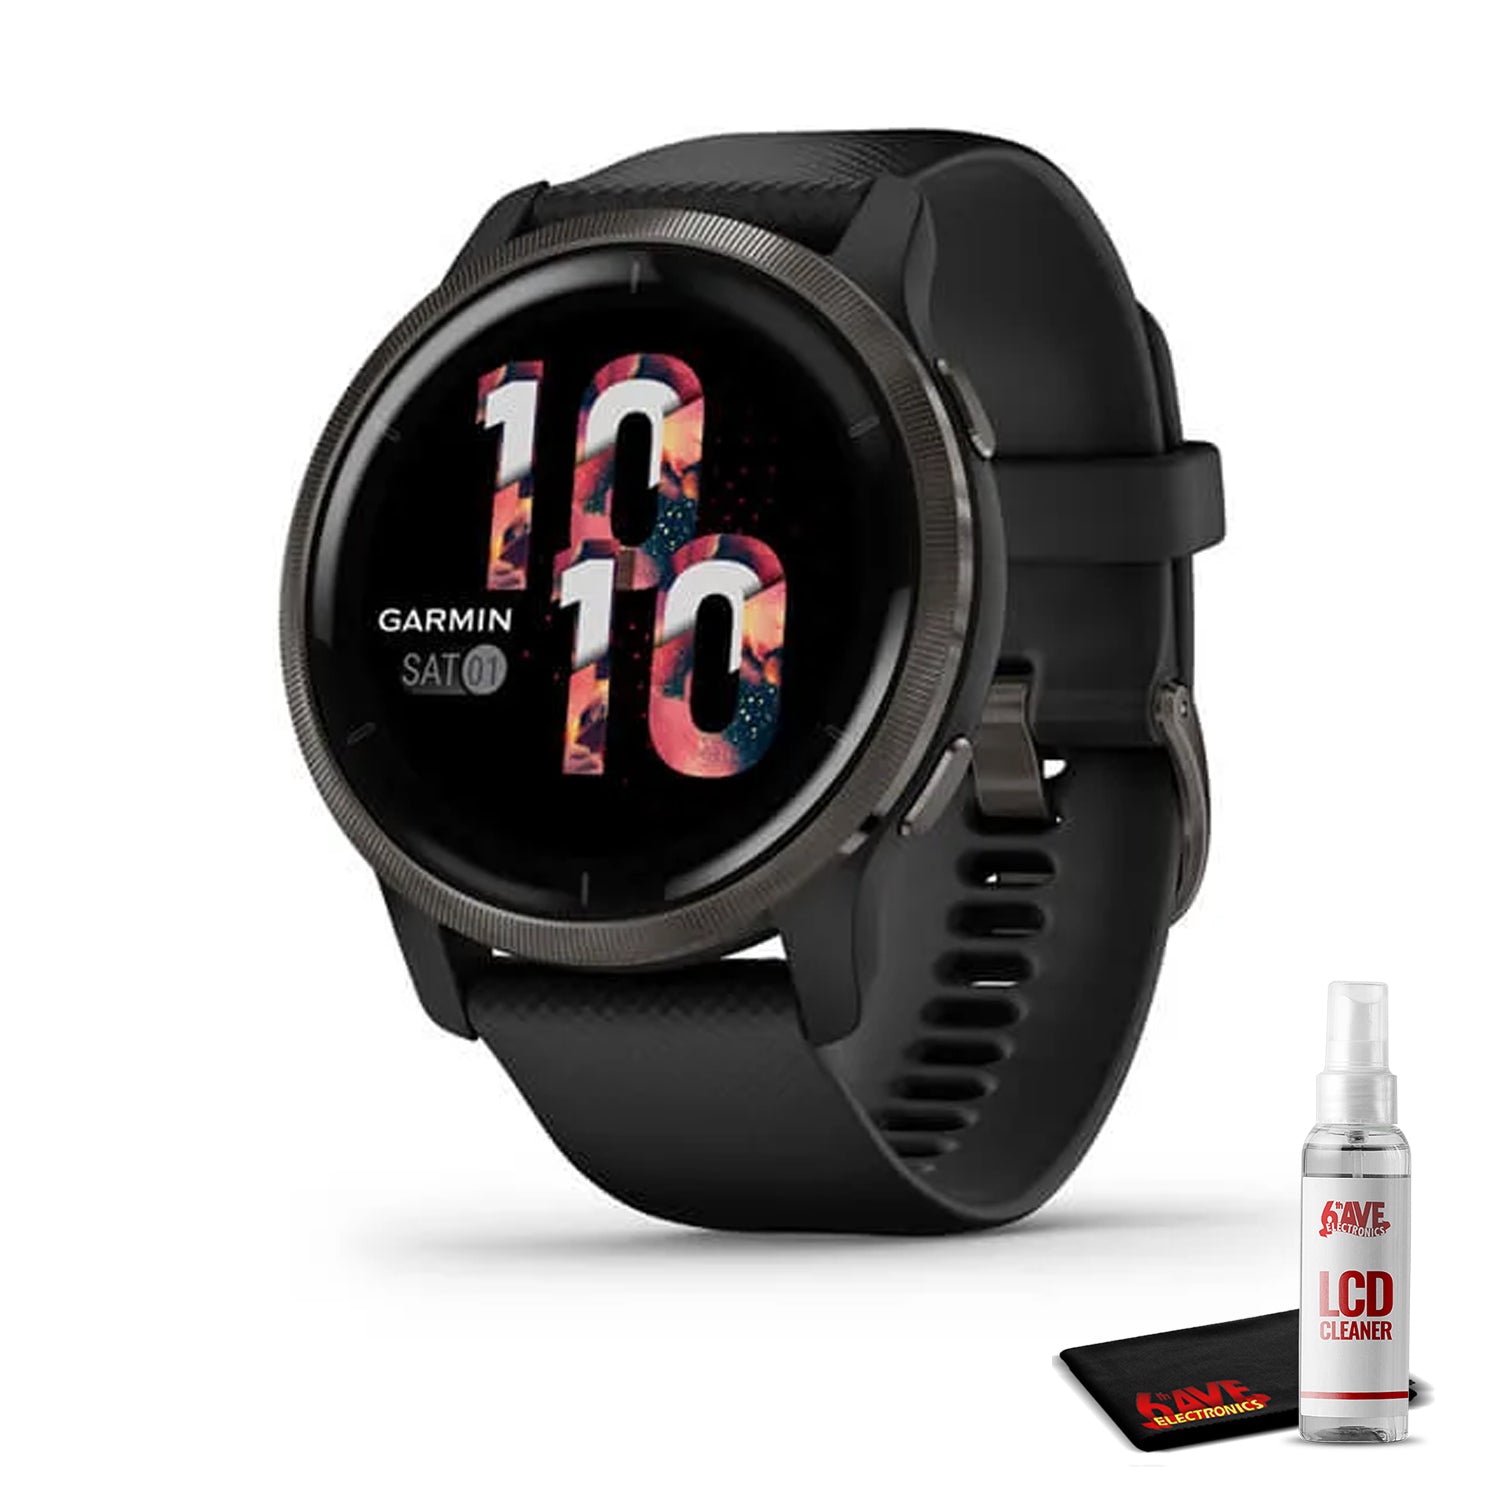 Garmin Venu 2 GPS Smartwatch with 6Ave Cleaning Kit